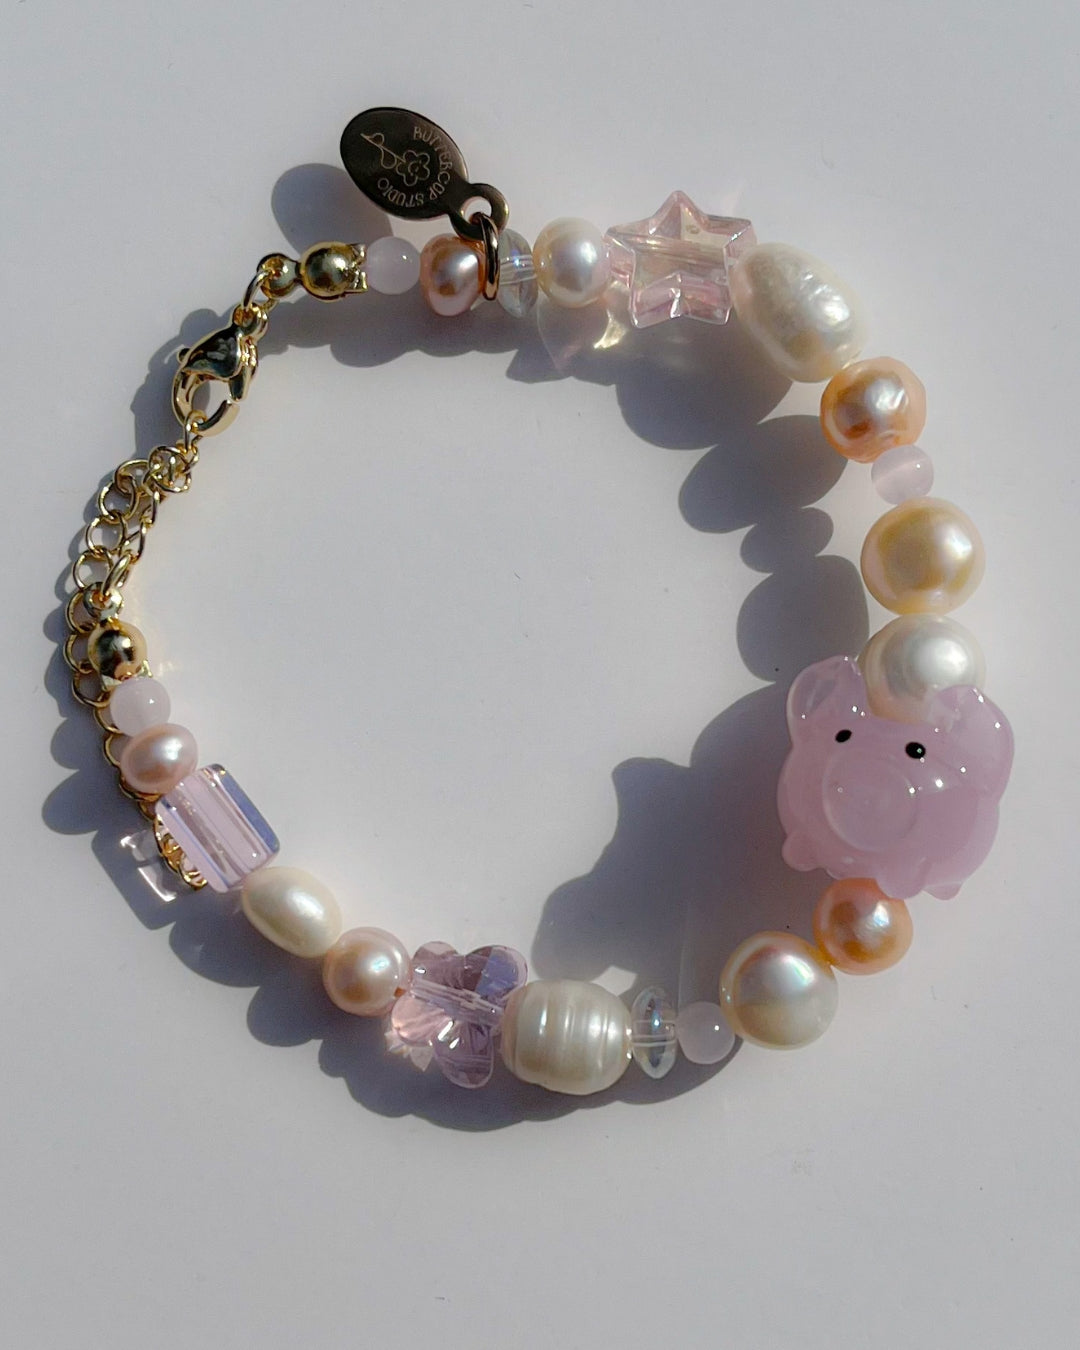 A studio shot of Buttercup Studio's Pink Piggie Freshwater Pearls Bracelet. Features assorted freshwater pearls, sheer pink beads and a special lampwork glass pink pig bead.